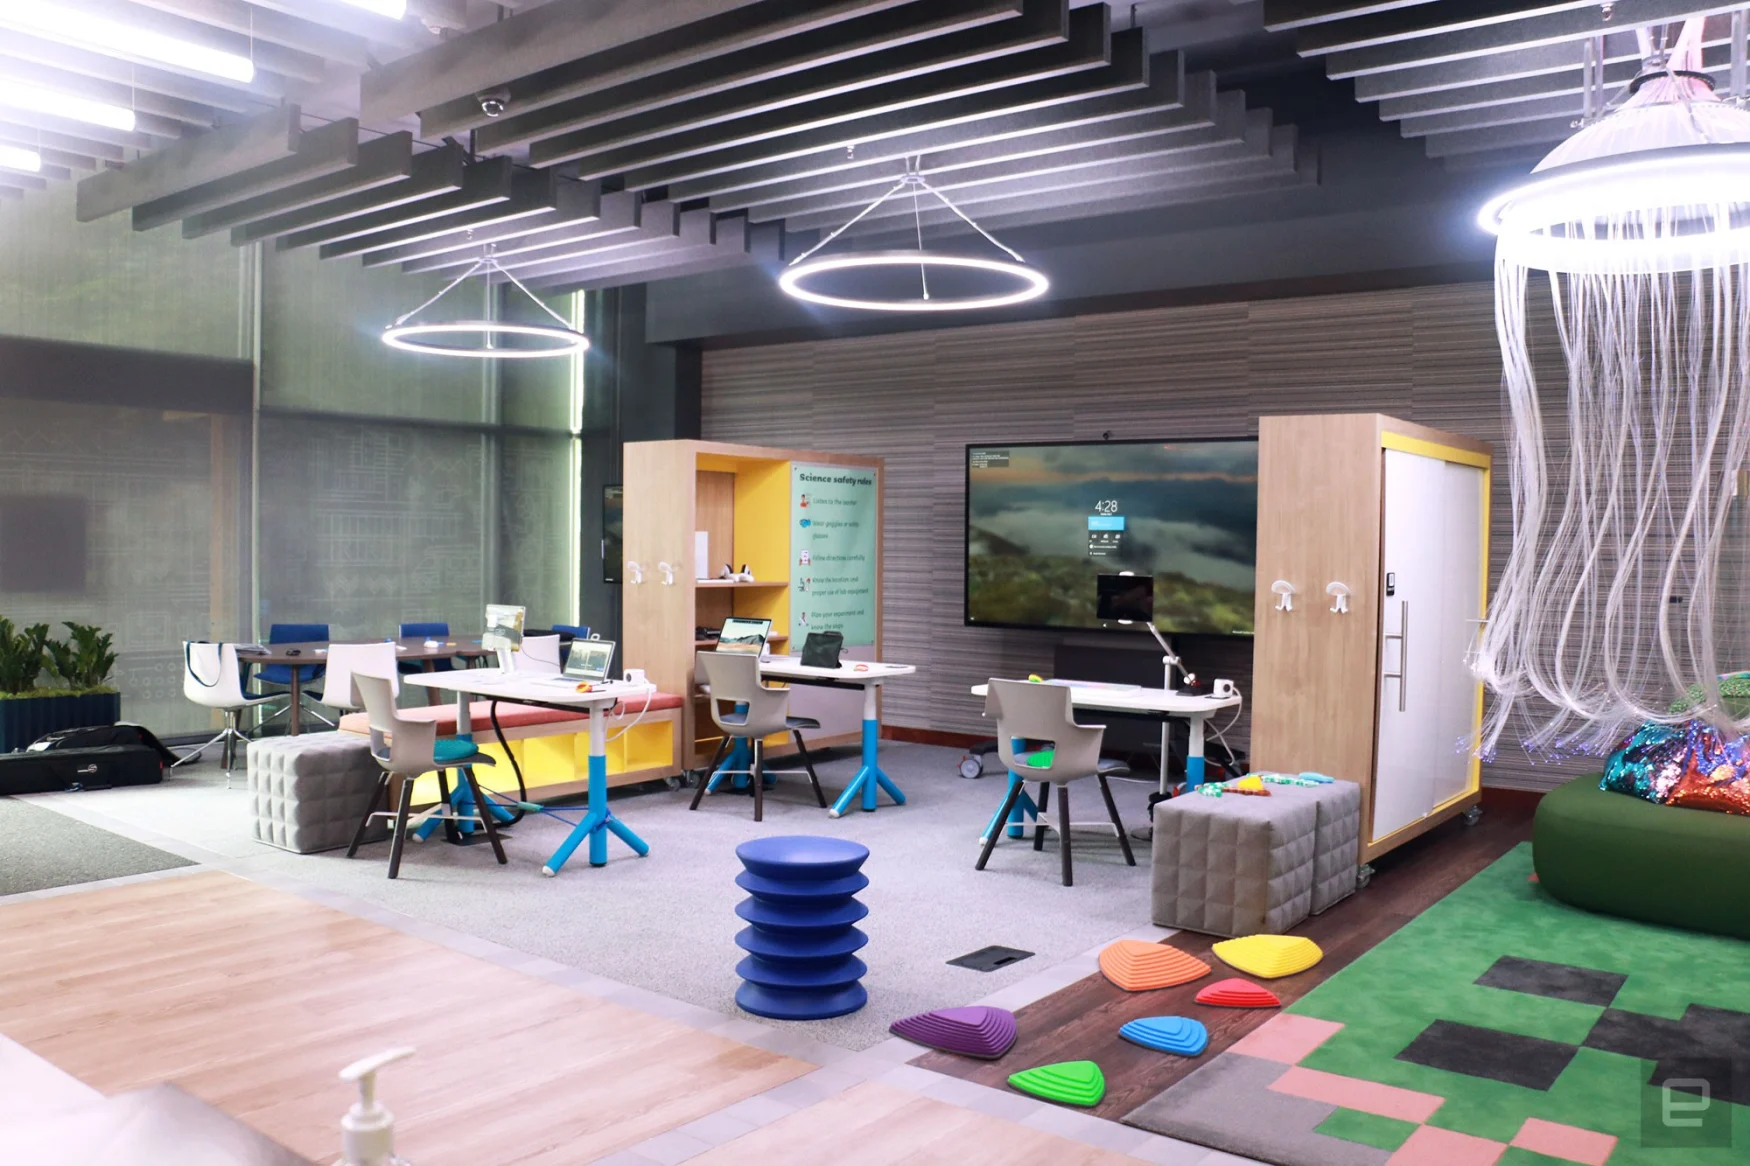 The right side of Microsoft's new Inclusive Tech Lab, where there  are colorful pieces of furniture scattered across three sections. On the right is a pseudo jellyfish fixture hanging from the ceiling.